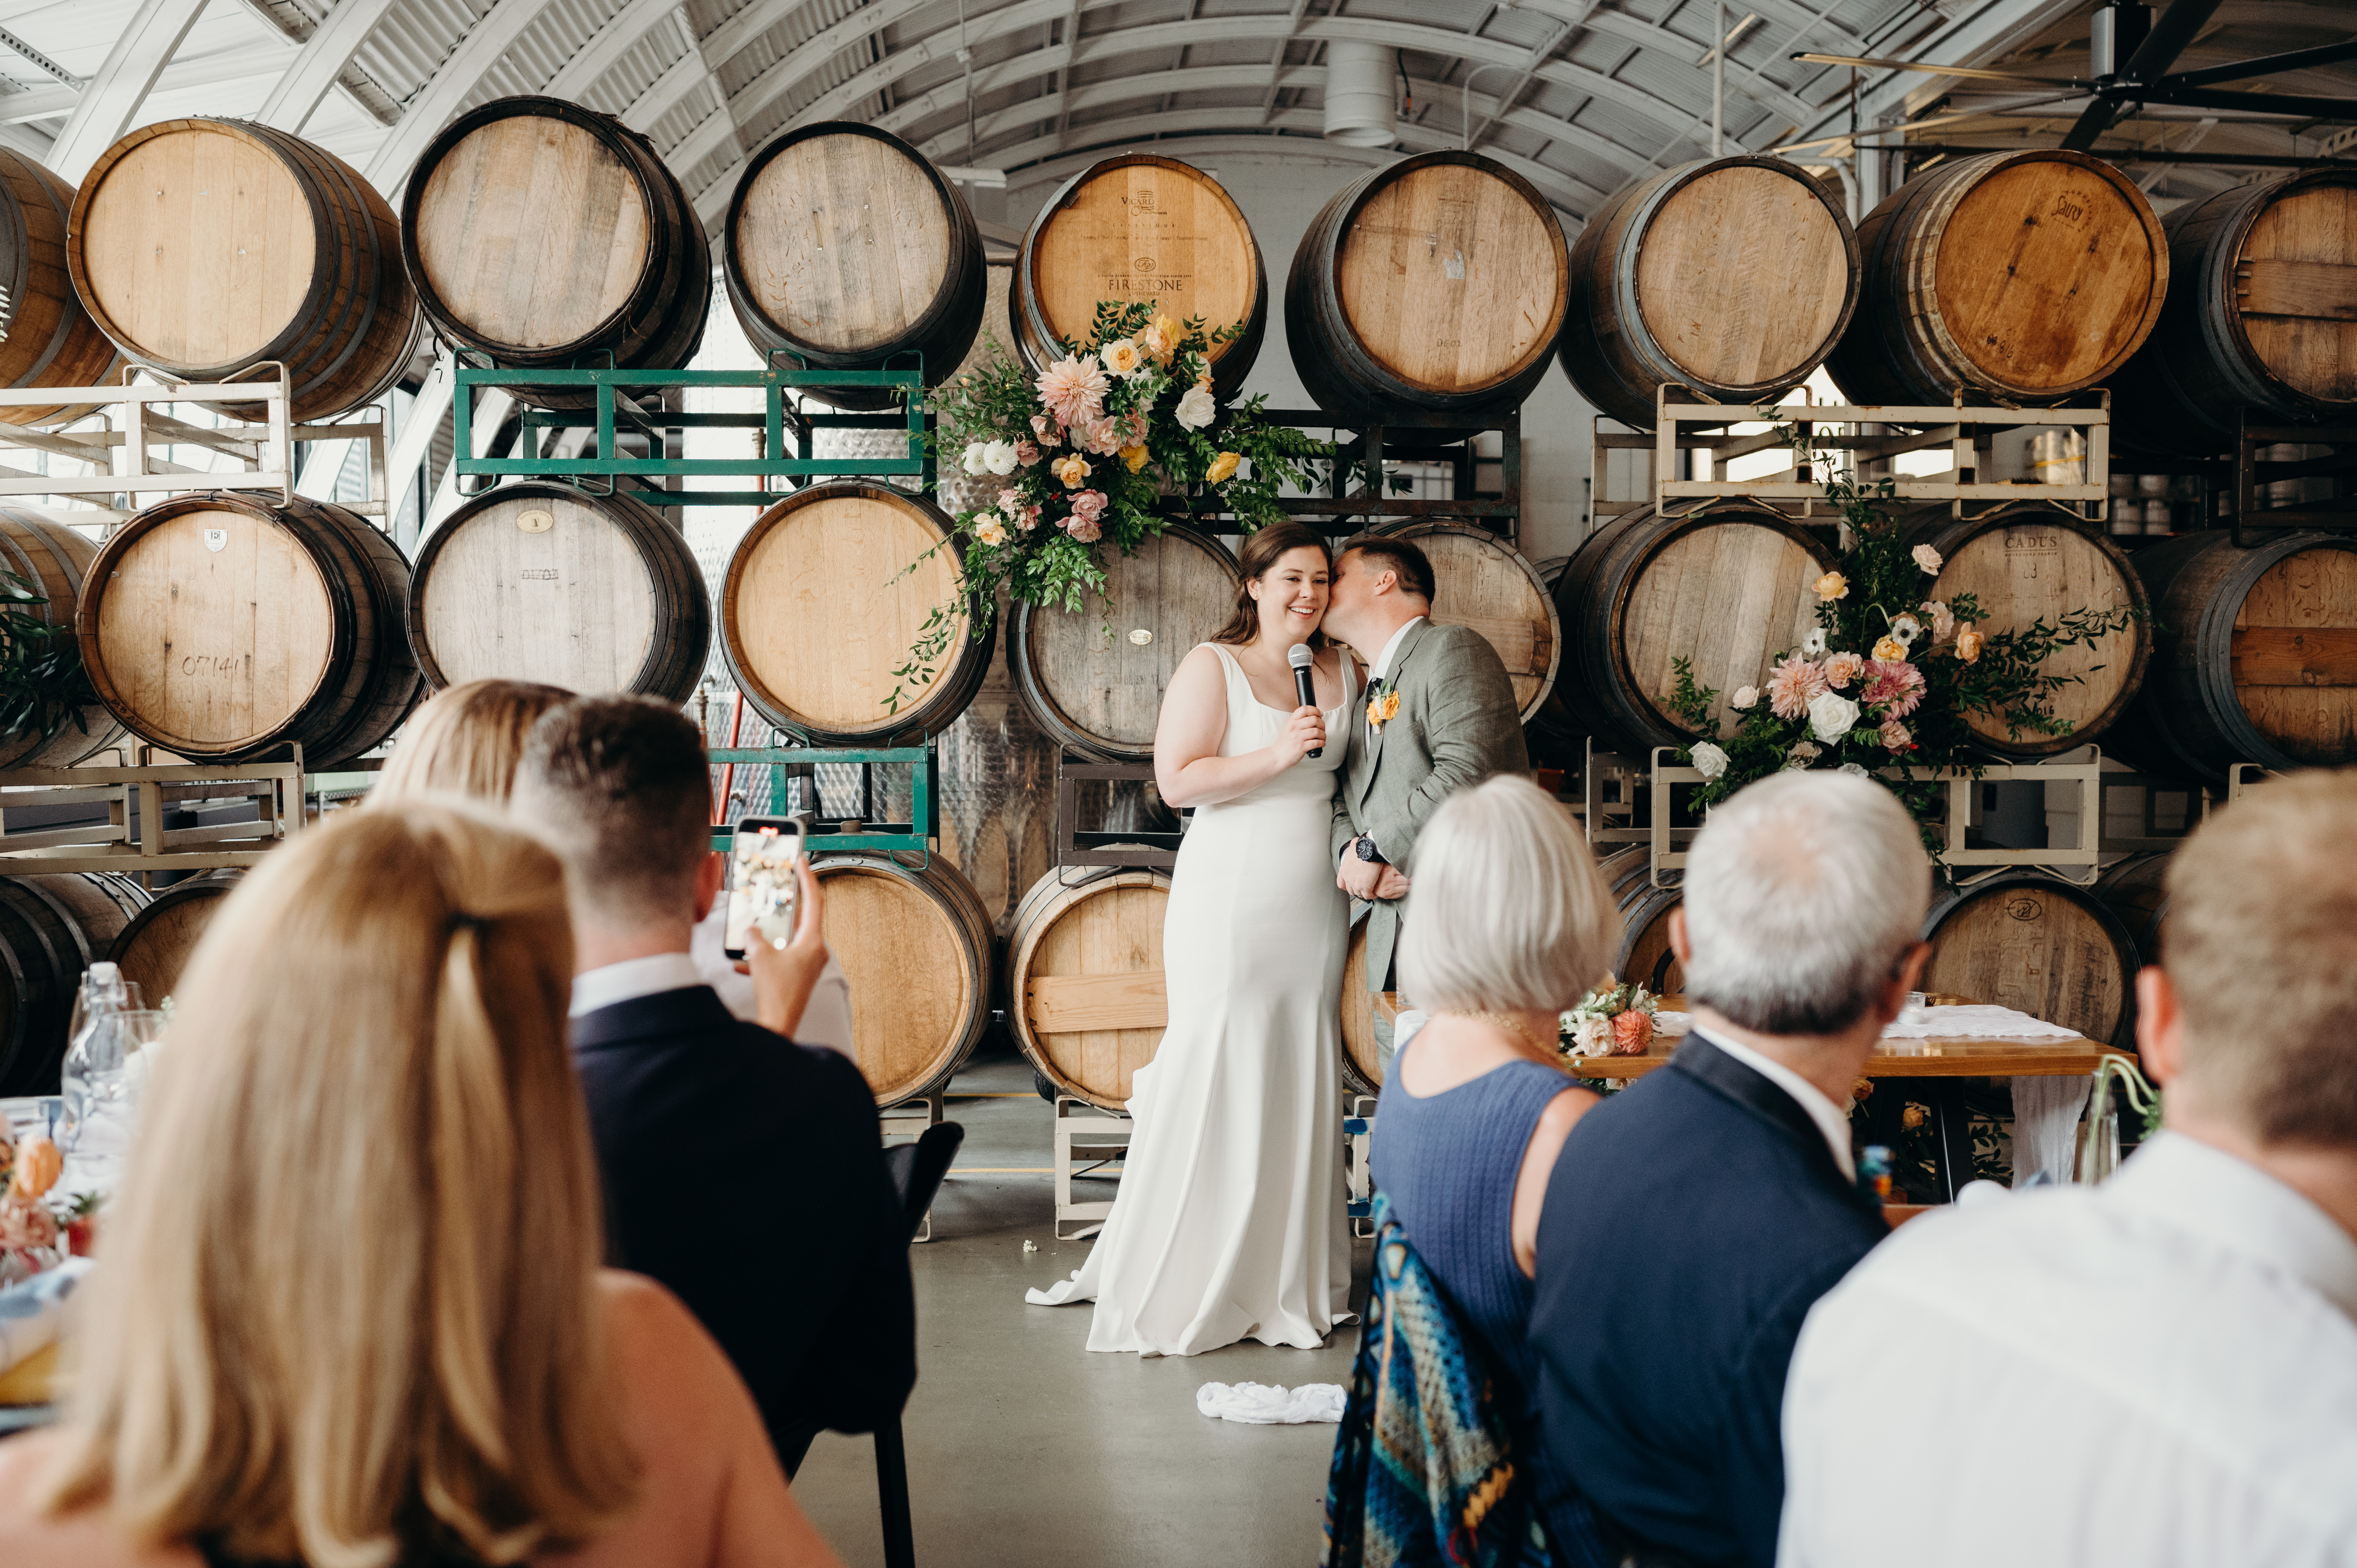 bride and groom give a welcome speech to their wedding guests at Coopers Hall while standing in front of wall of wine barrels